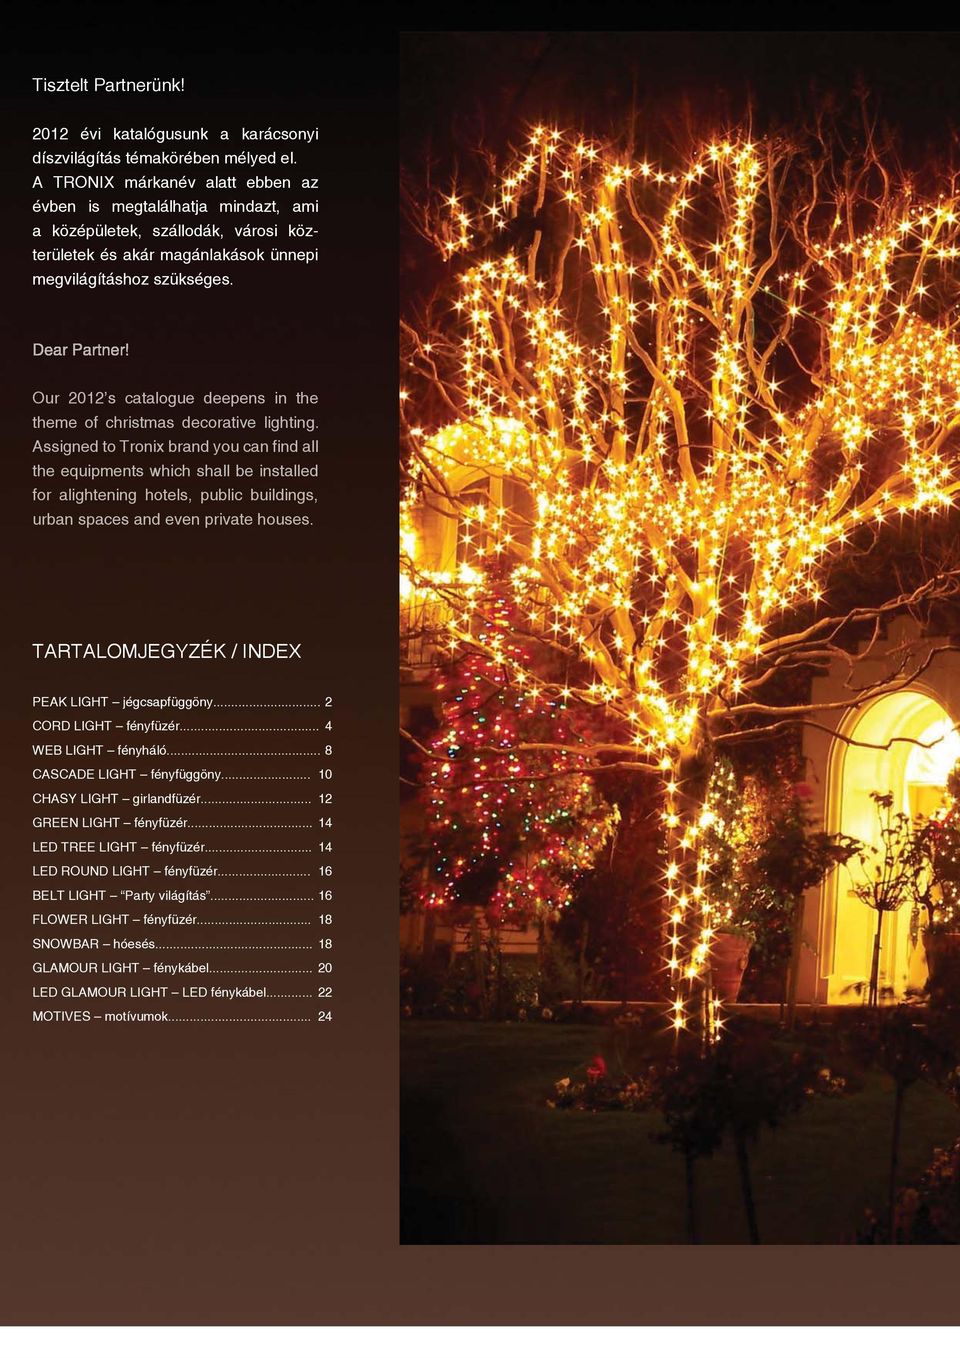 Our 2012 s catalogue deepens in the theme of christmas decorative lighting.